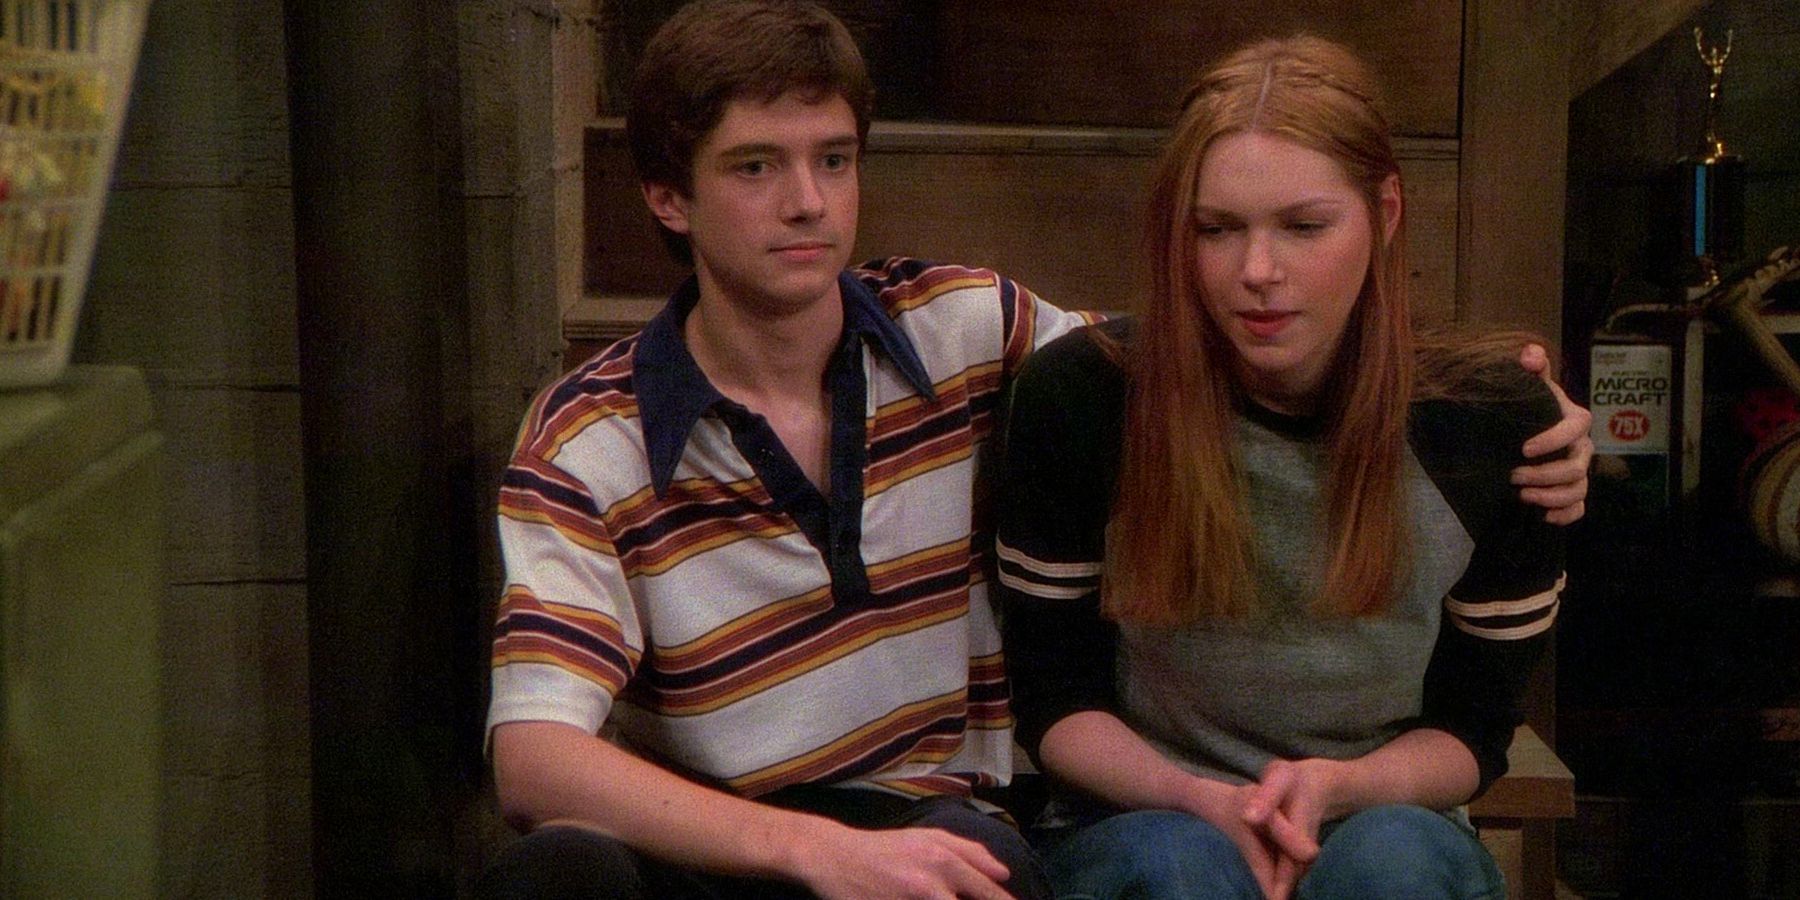 Eric (Topher Grace) with His Arm Awkwardly Around Donna (Laura Prepon) in the That '70s Show Pilot Episode